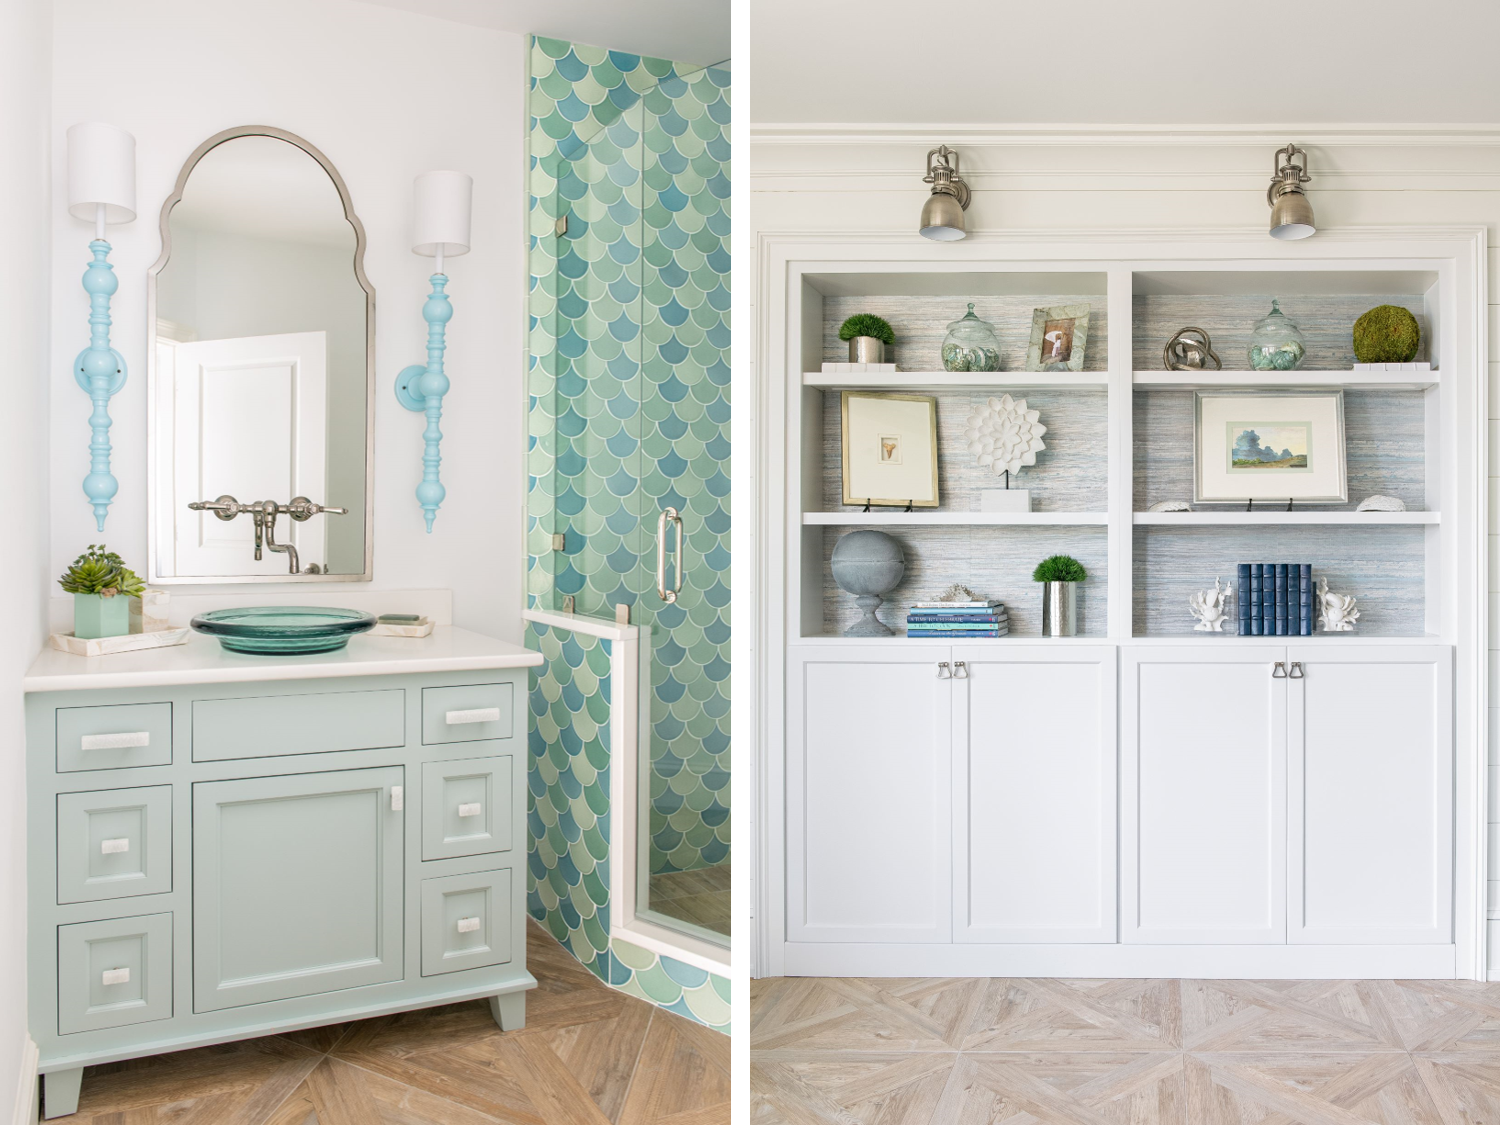 ocean hues and unique textures and patterns create a fun coastal retreat designed by J. Banks Design Group